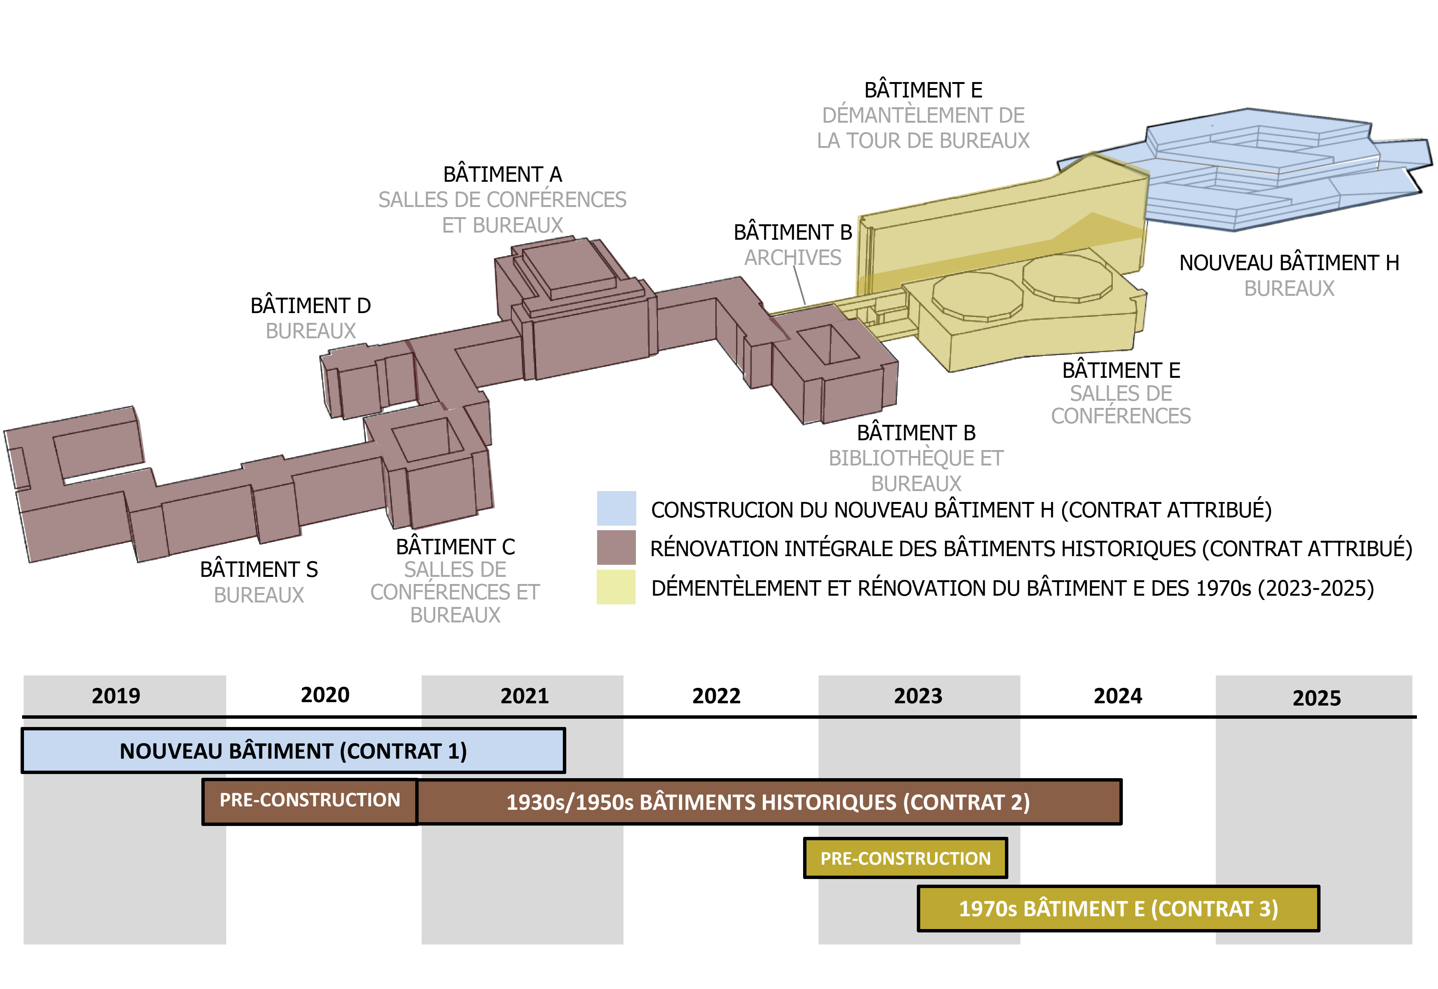 The graphic gives an overview of the different contracts awarded for the different buildings in the Palais des Nations.